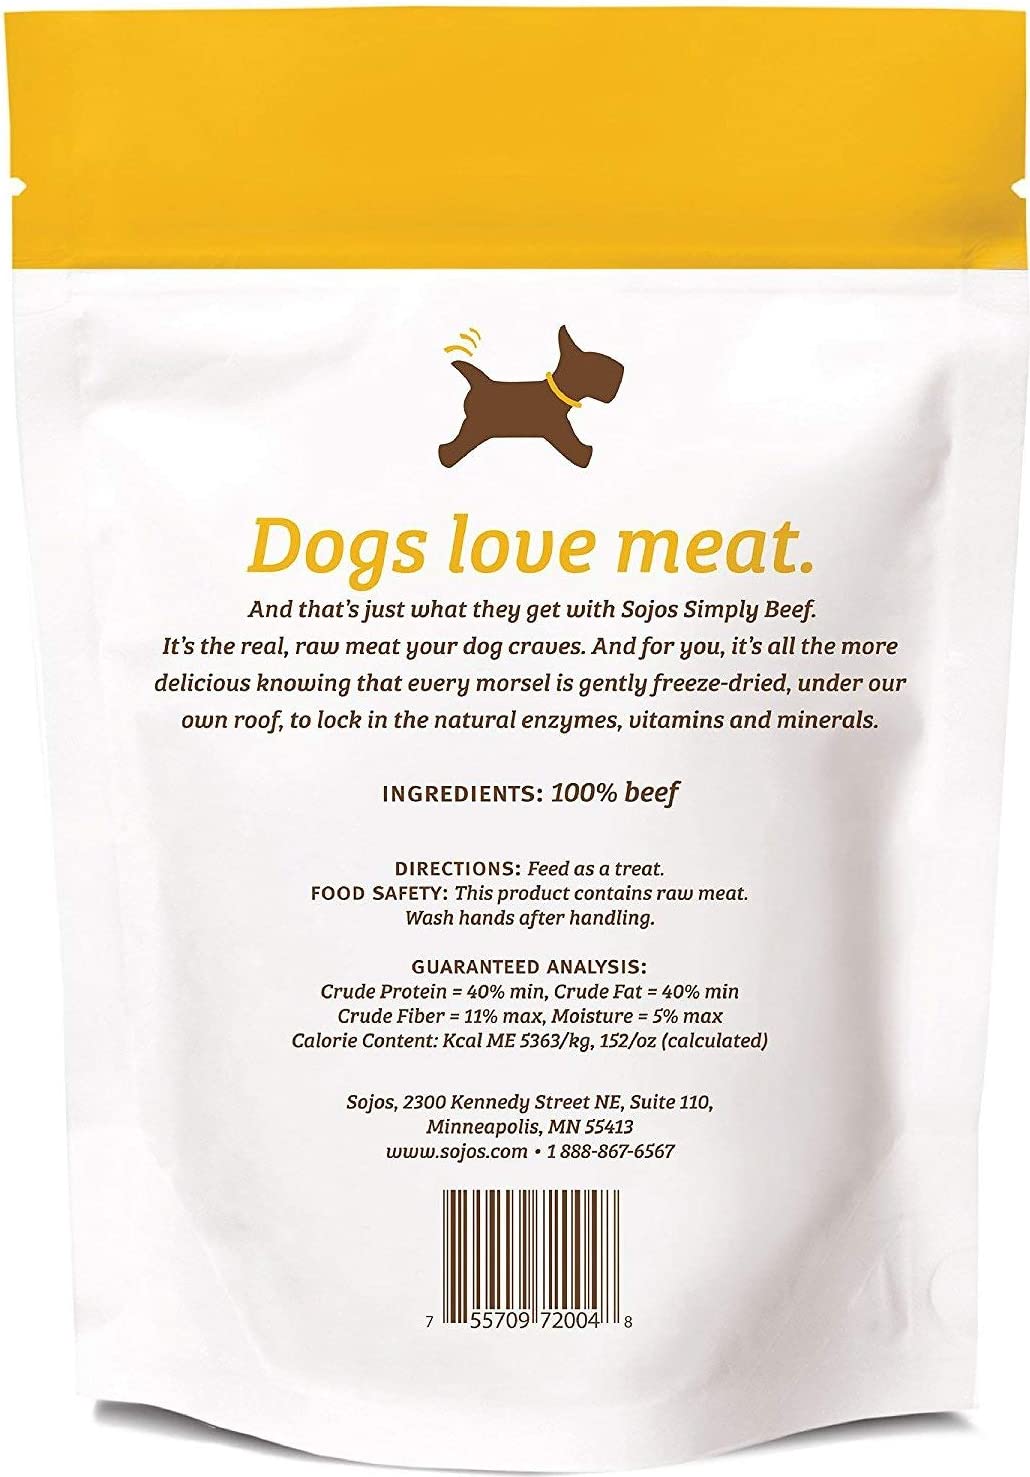 Sojos Sojos Simply Beef Dog Treats, Pack of 2